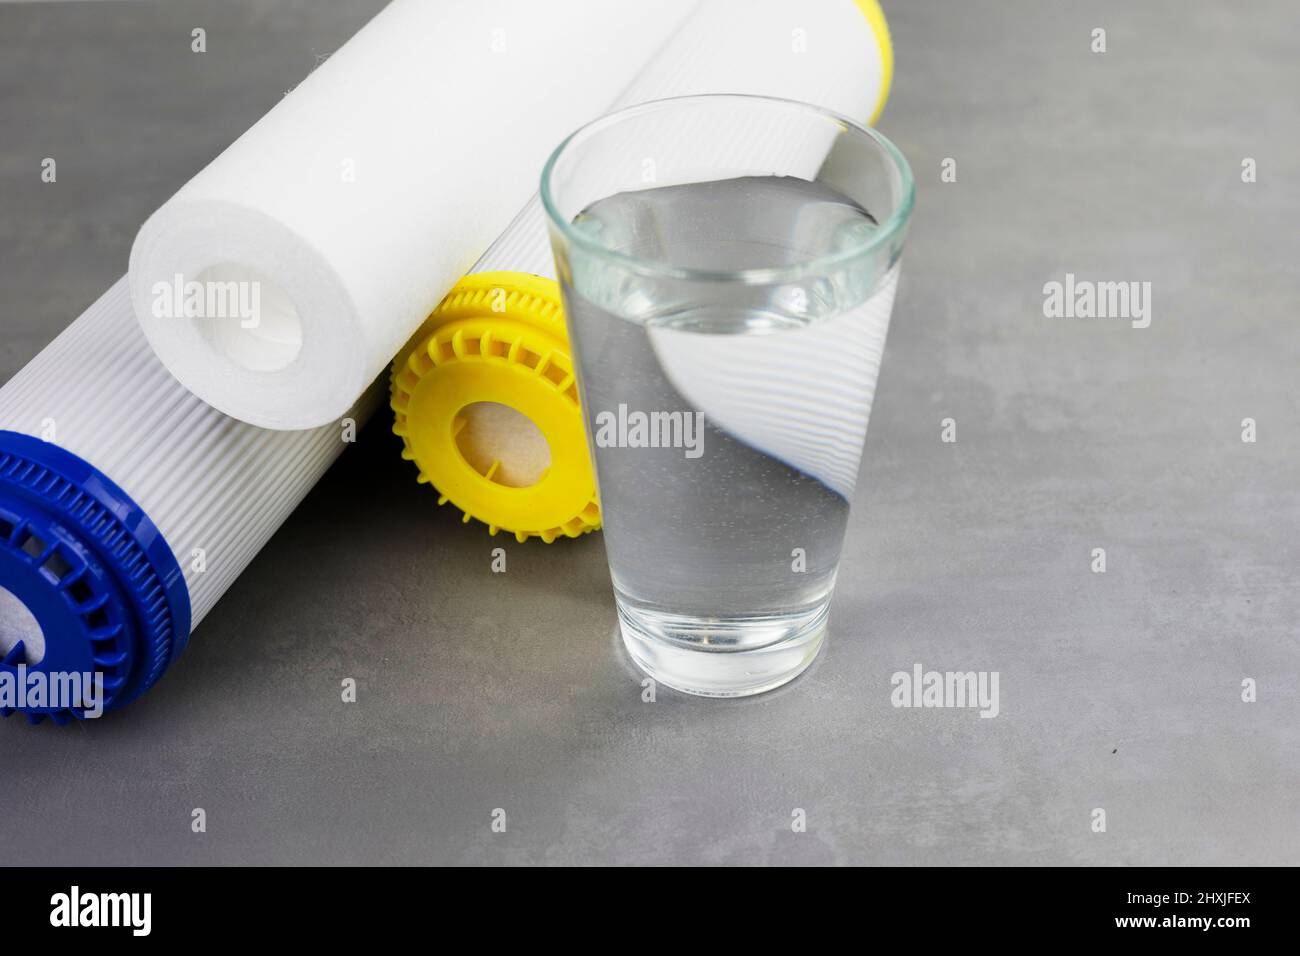 A glass of clean water next to the water purification filter. The concept of a household filtration system. Stock Photo